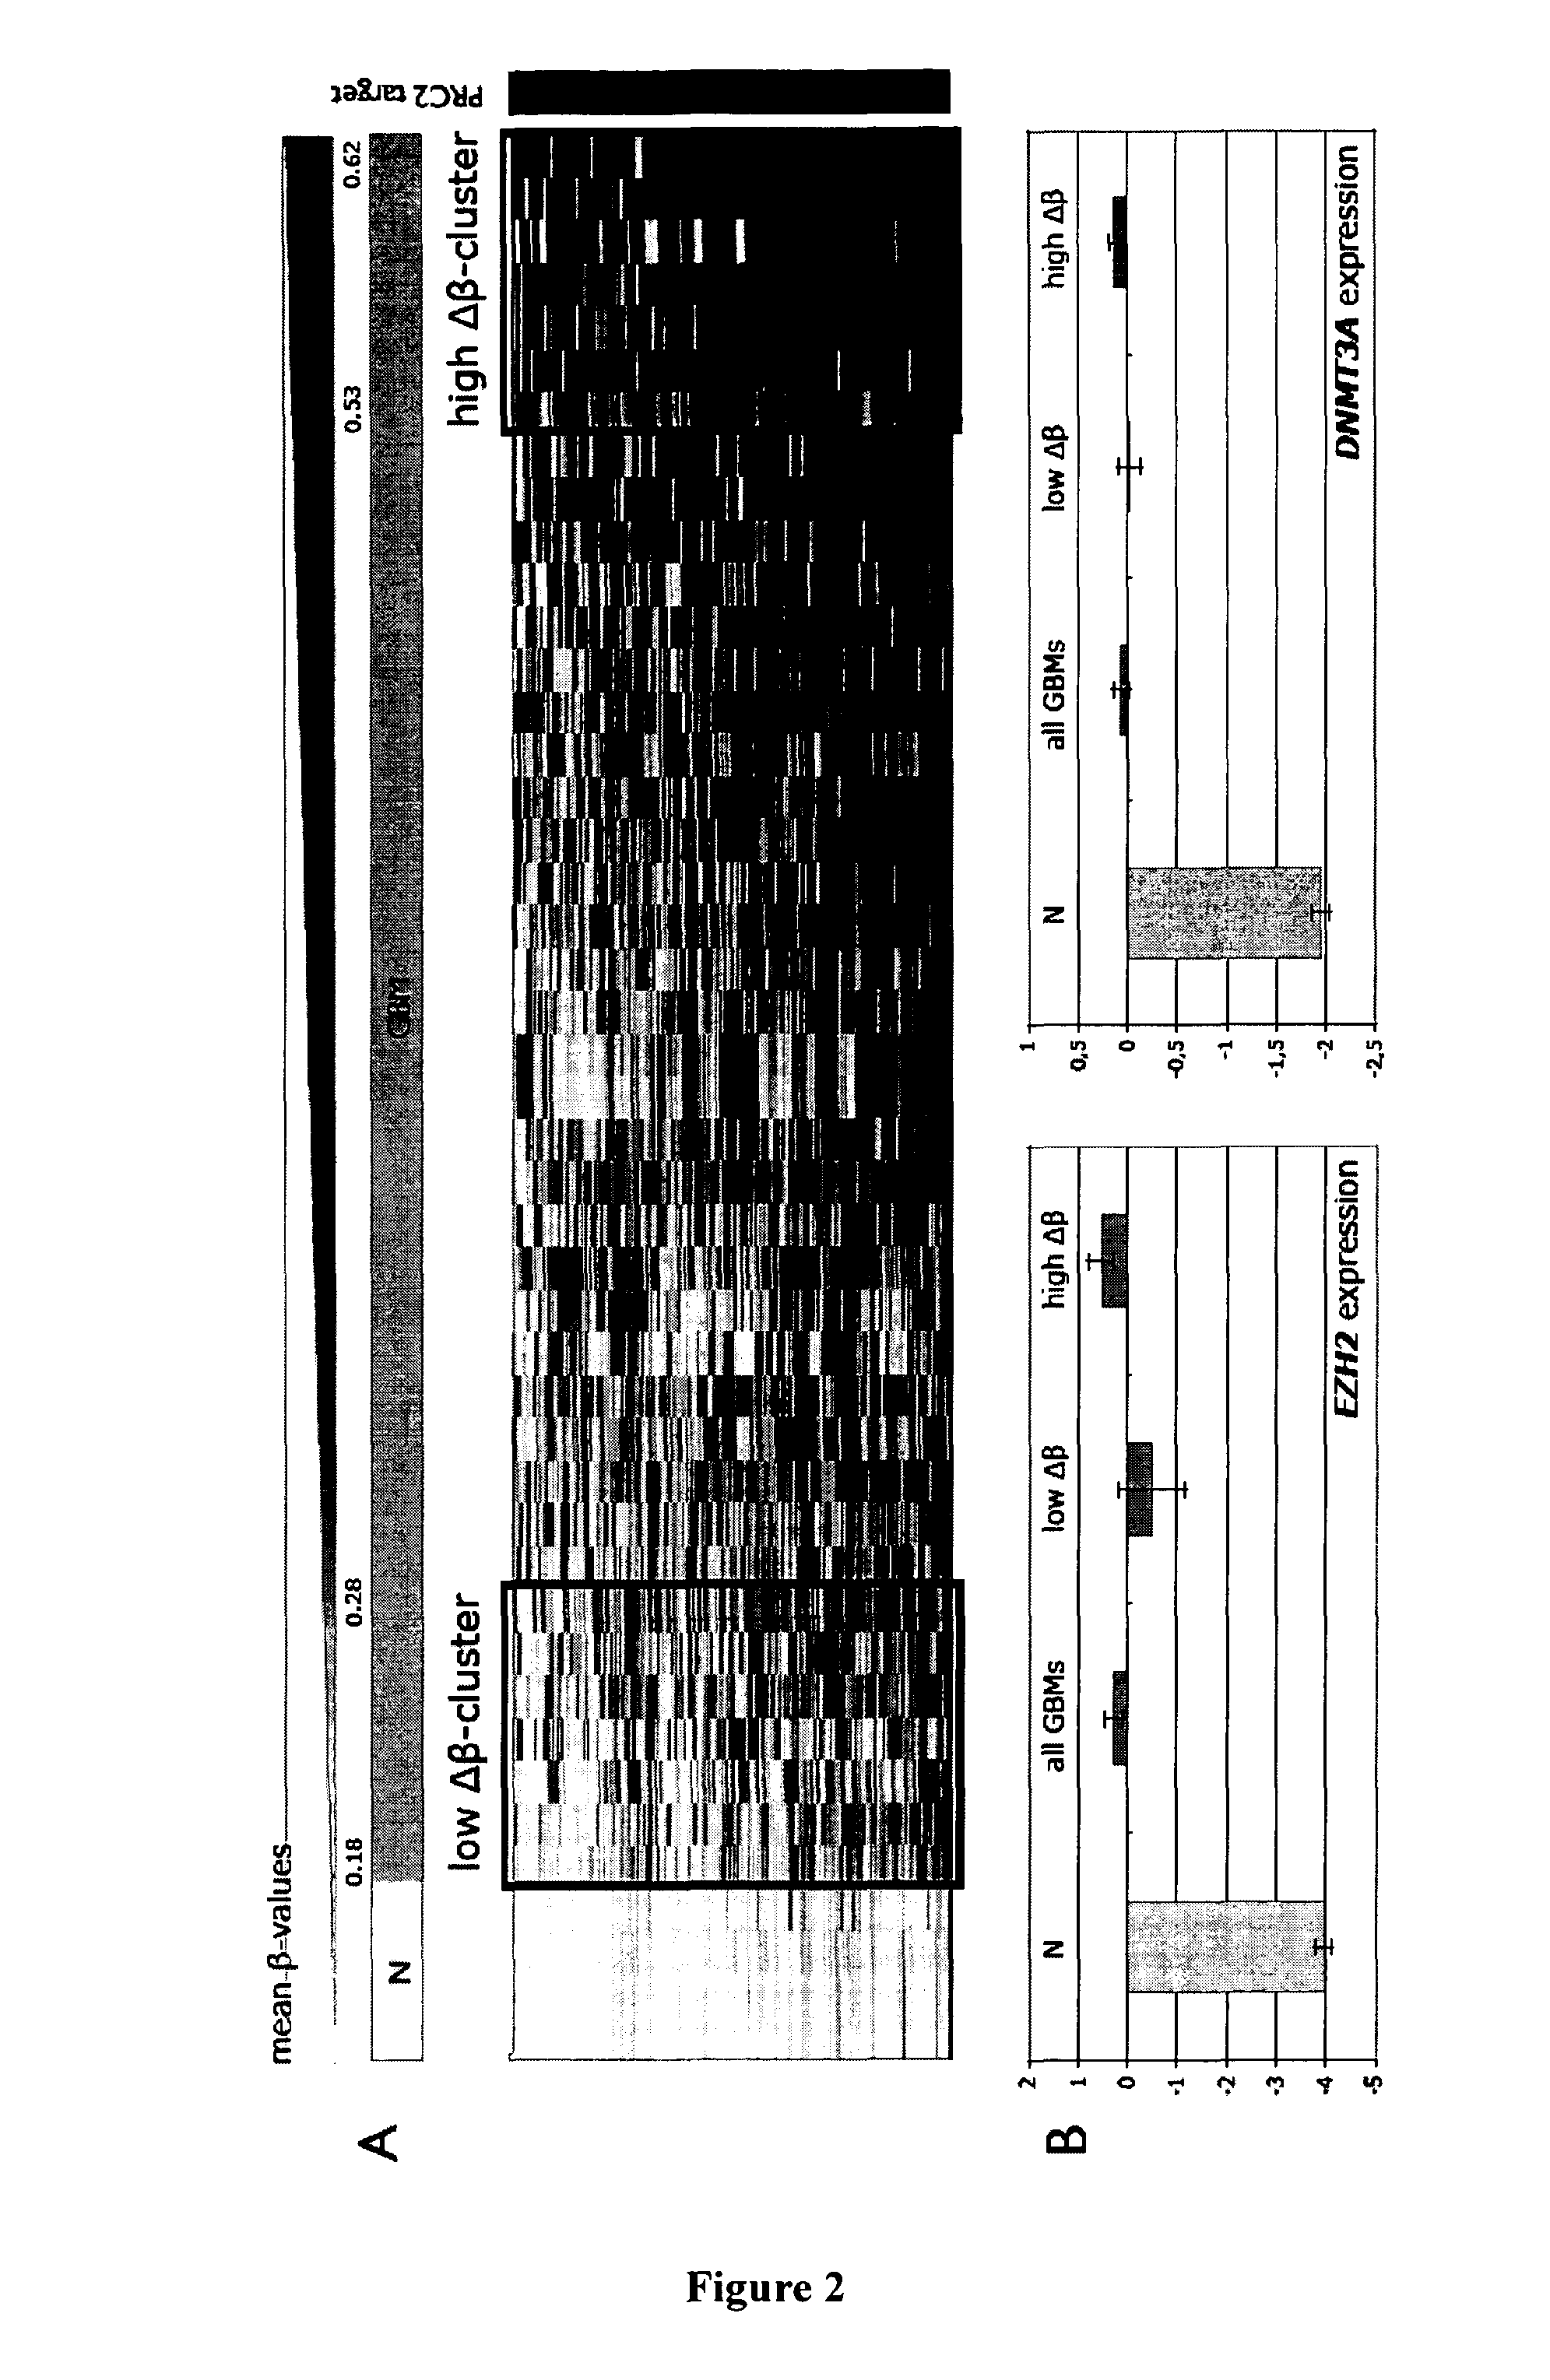 Biomarkers and methods for the prognosis of glioblastoma